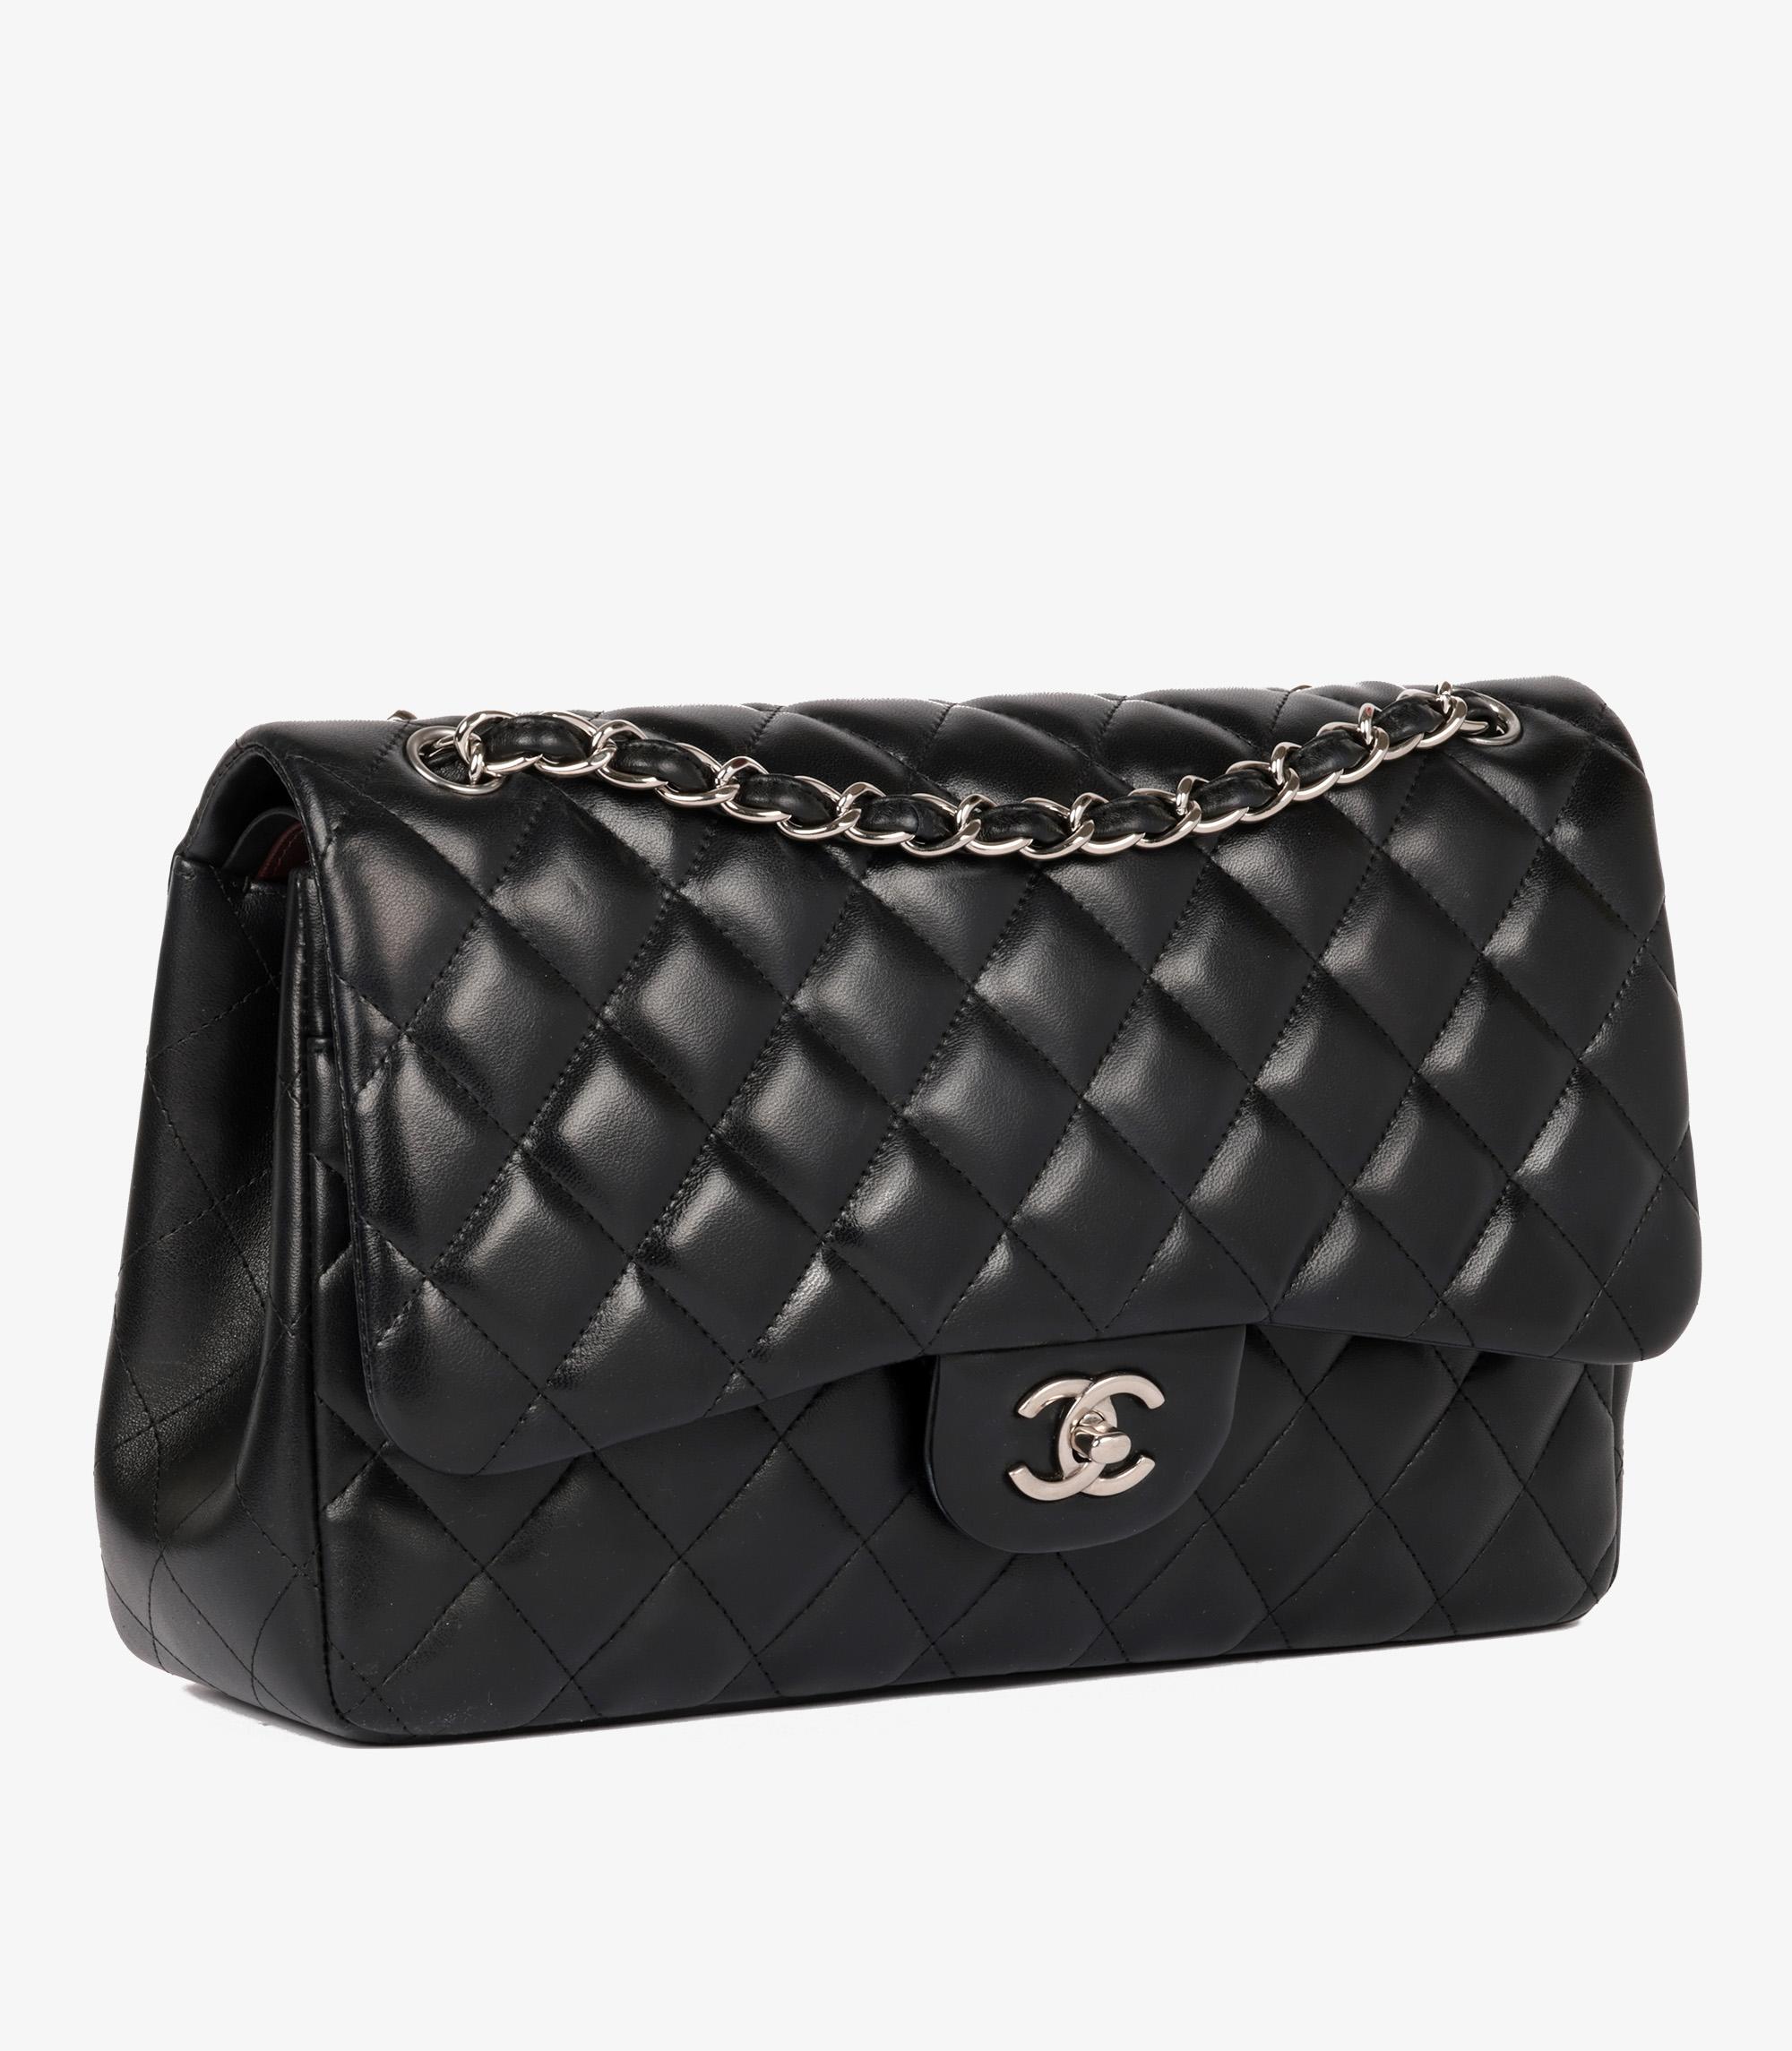 Chanel Black Quilted Lambskin Jumbo Classic Double Flap Bag In Excellent Condition For Sale In Bishop's Stortford, Hertfordshire